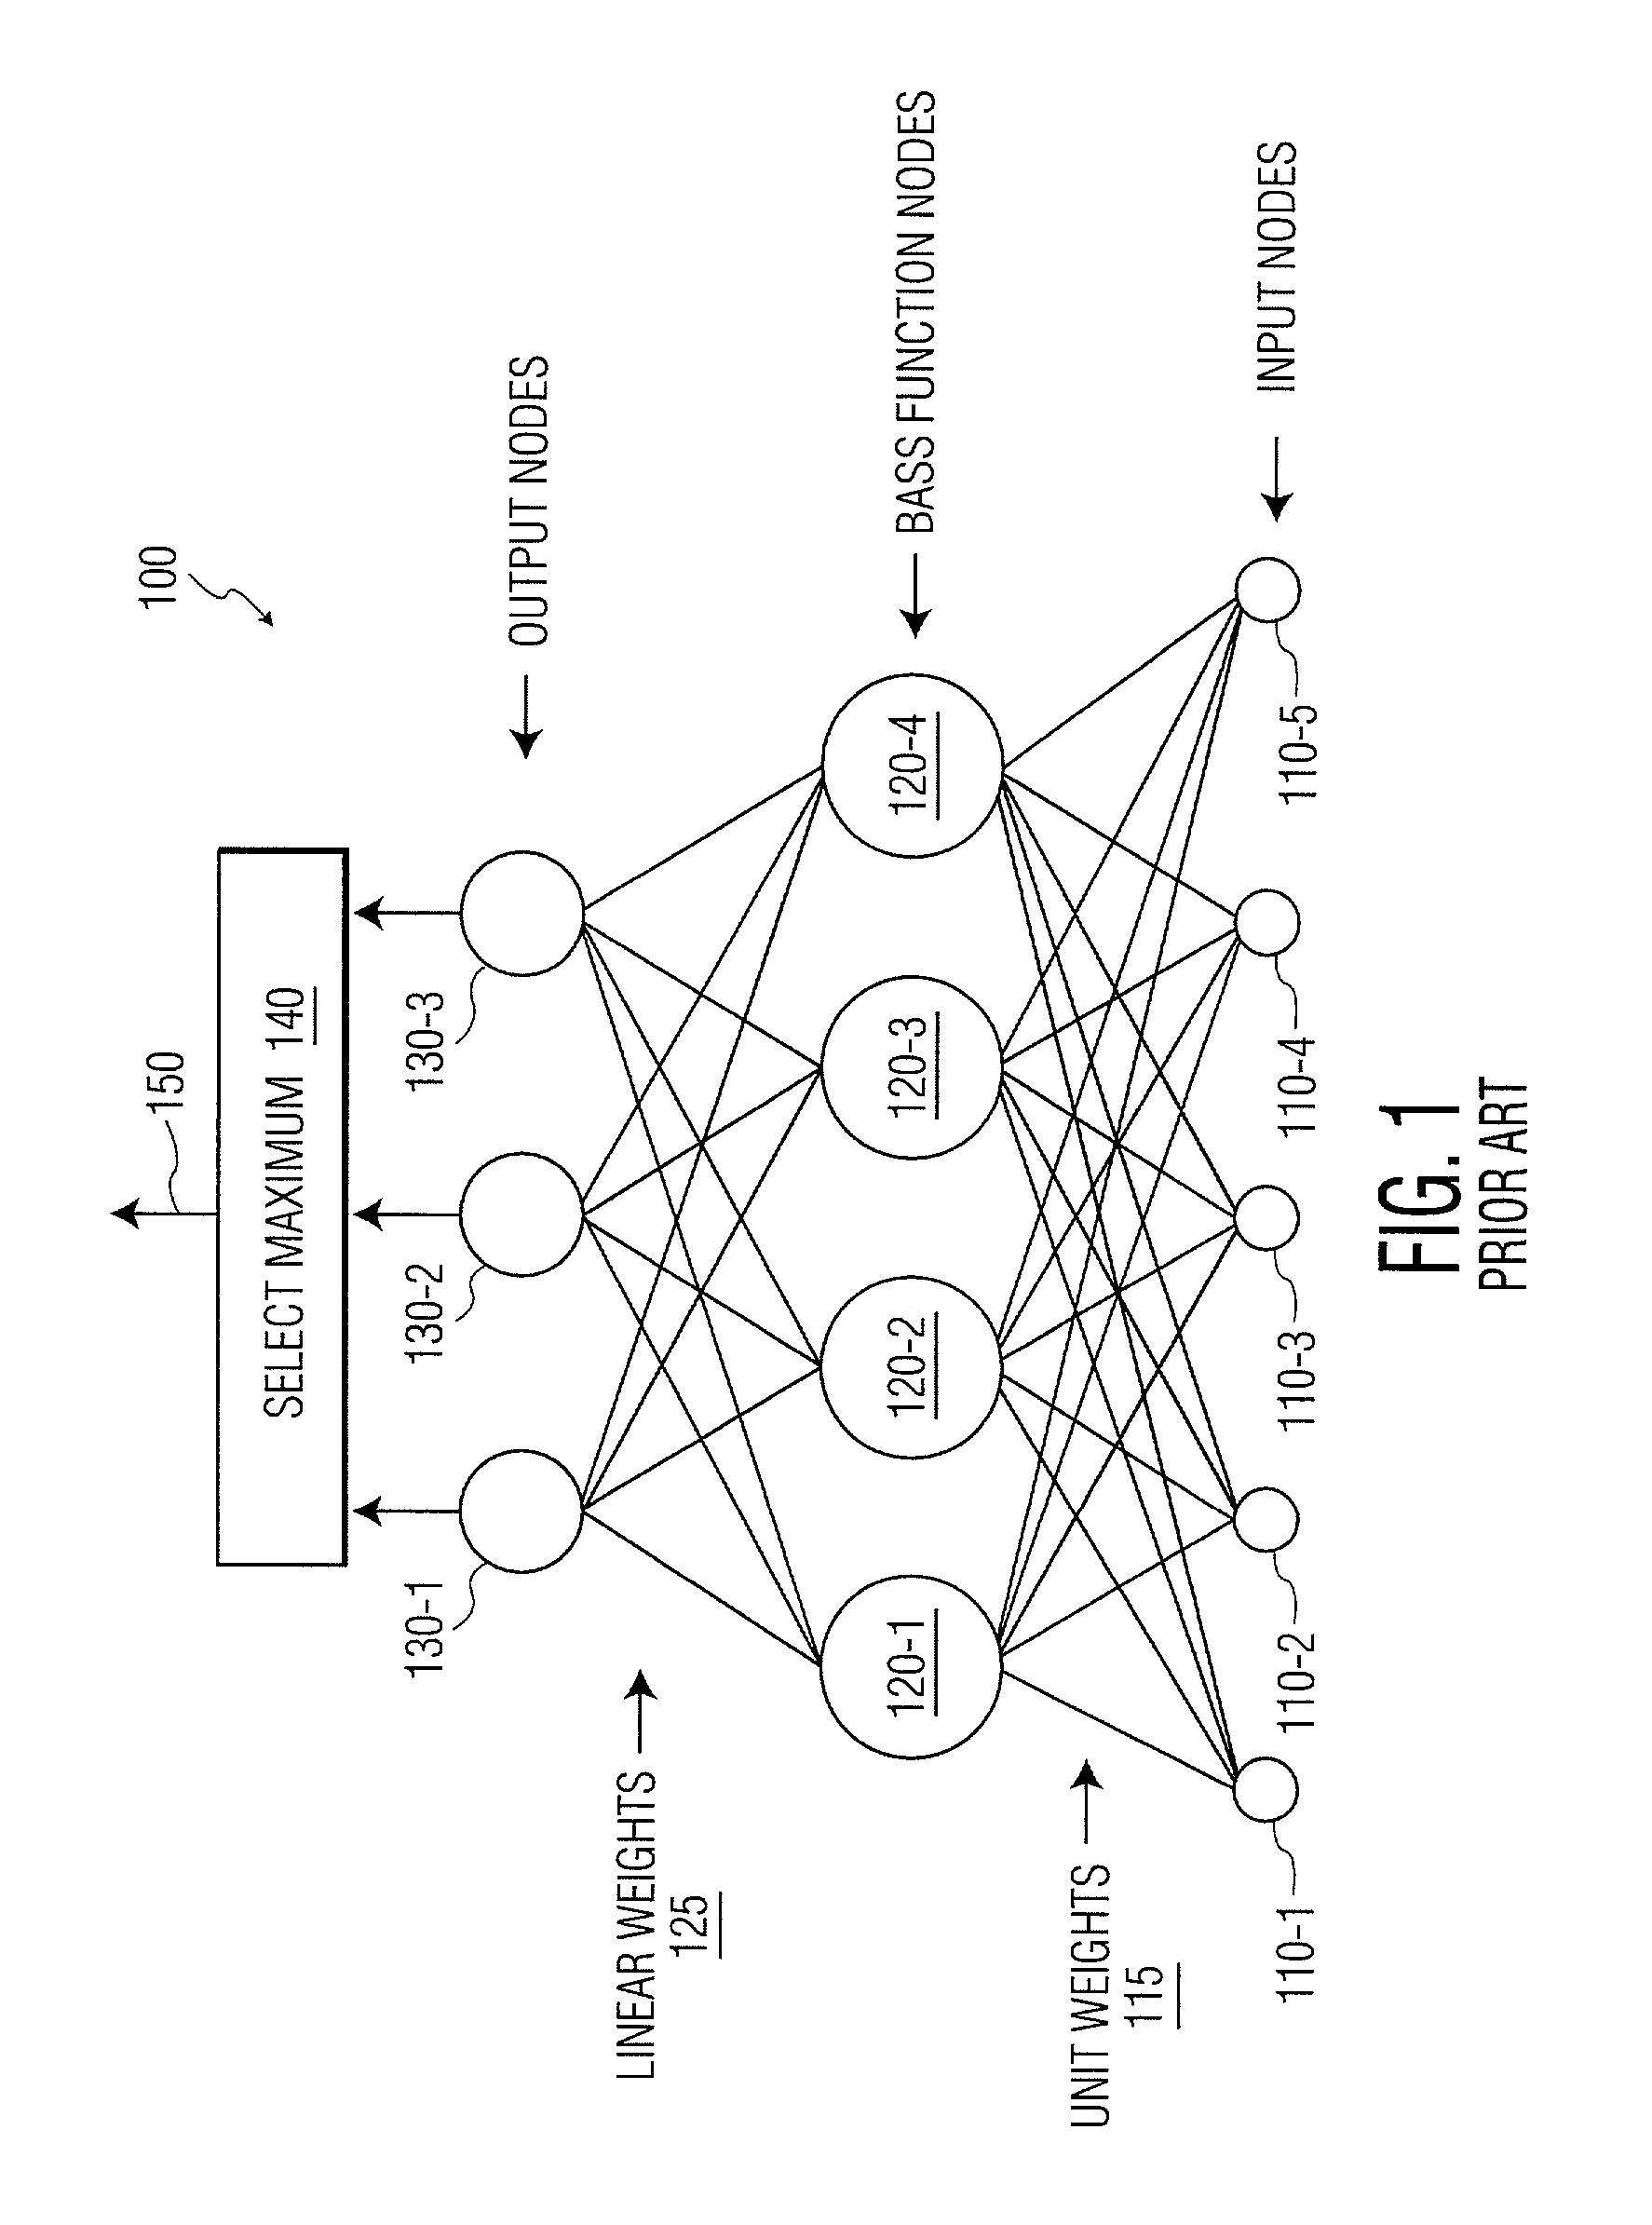 Computer vision system and method employing hierarchical object classification scheme